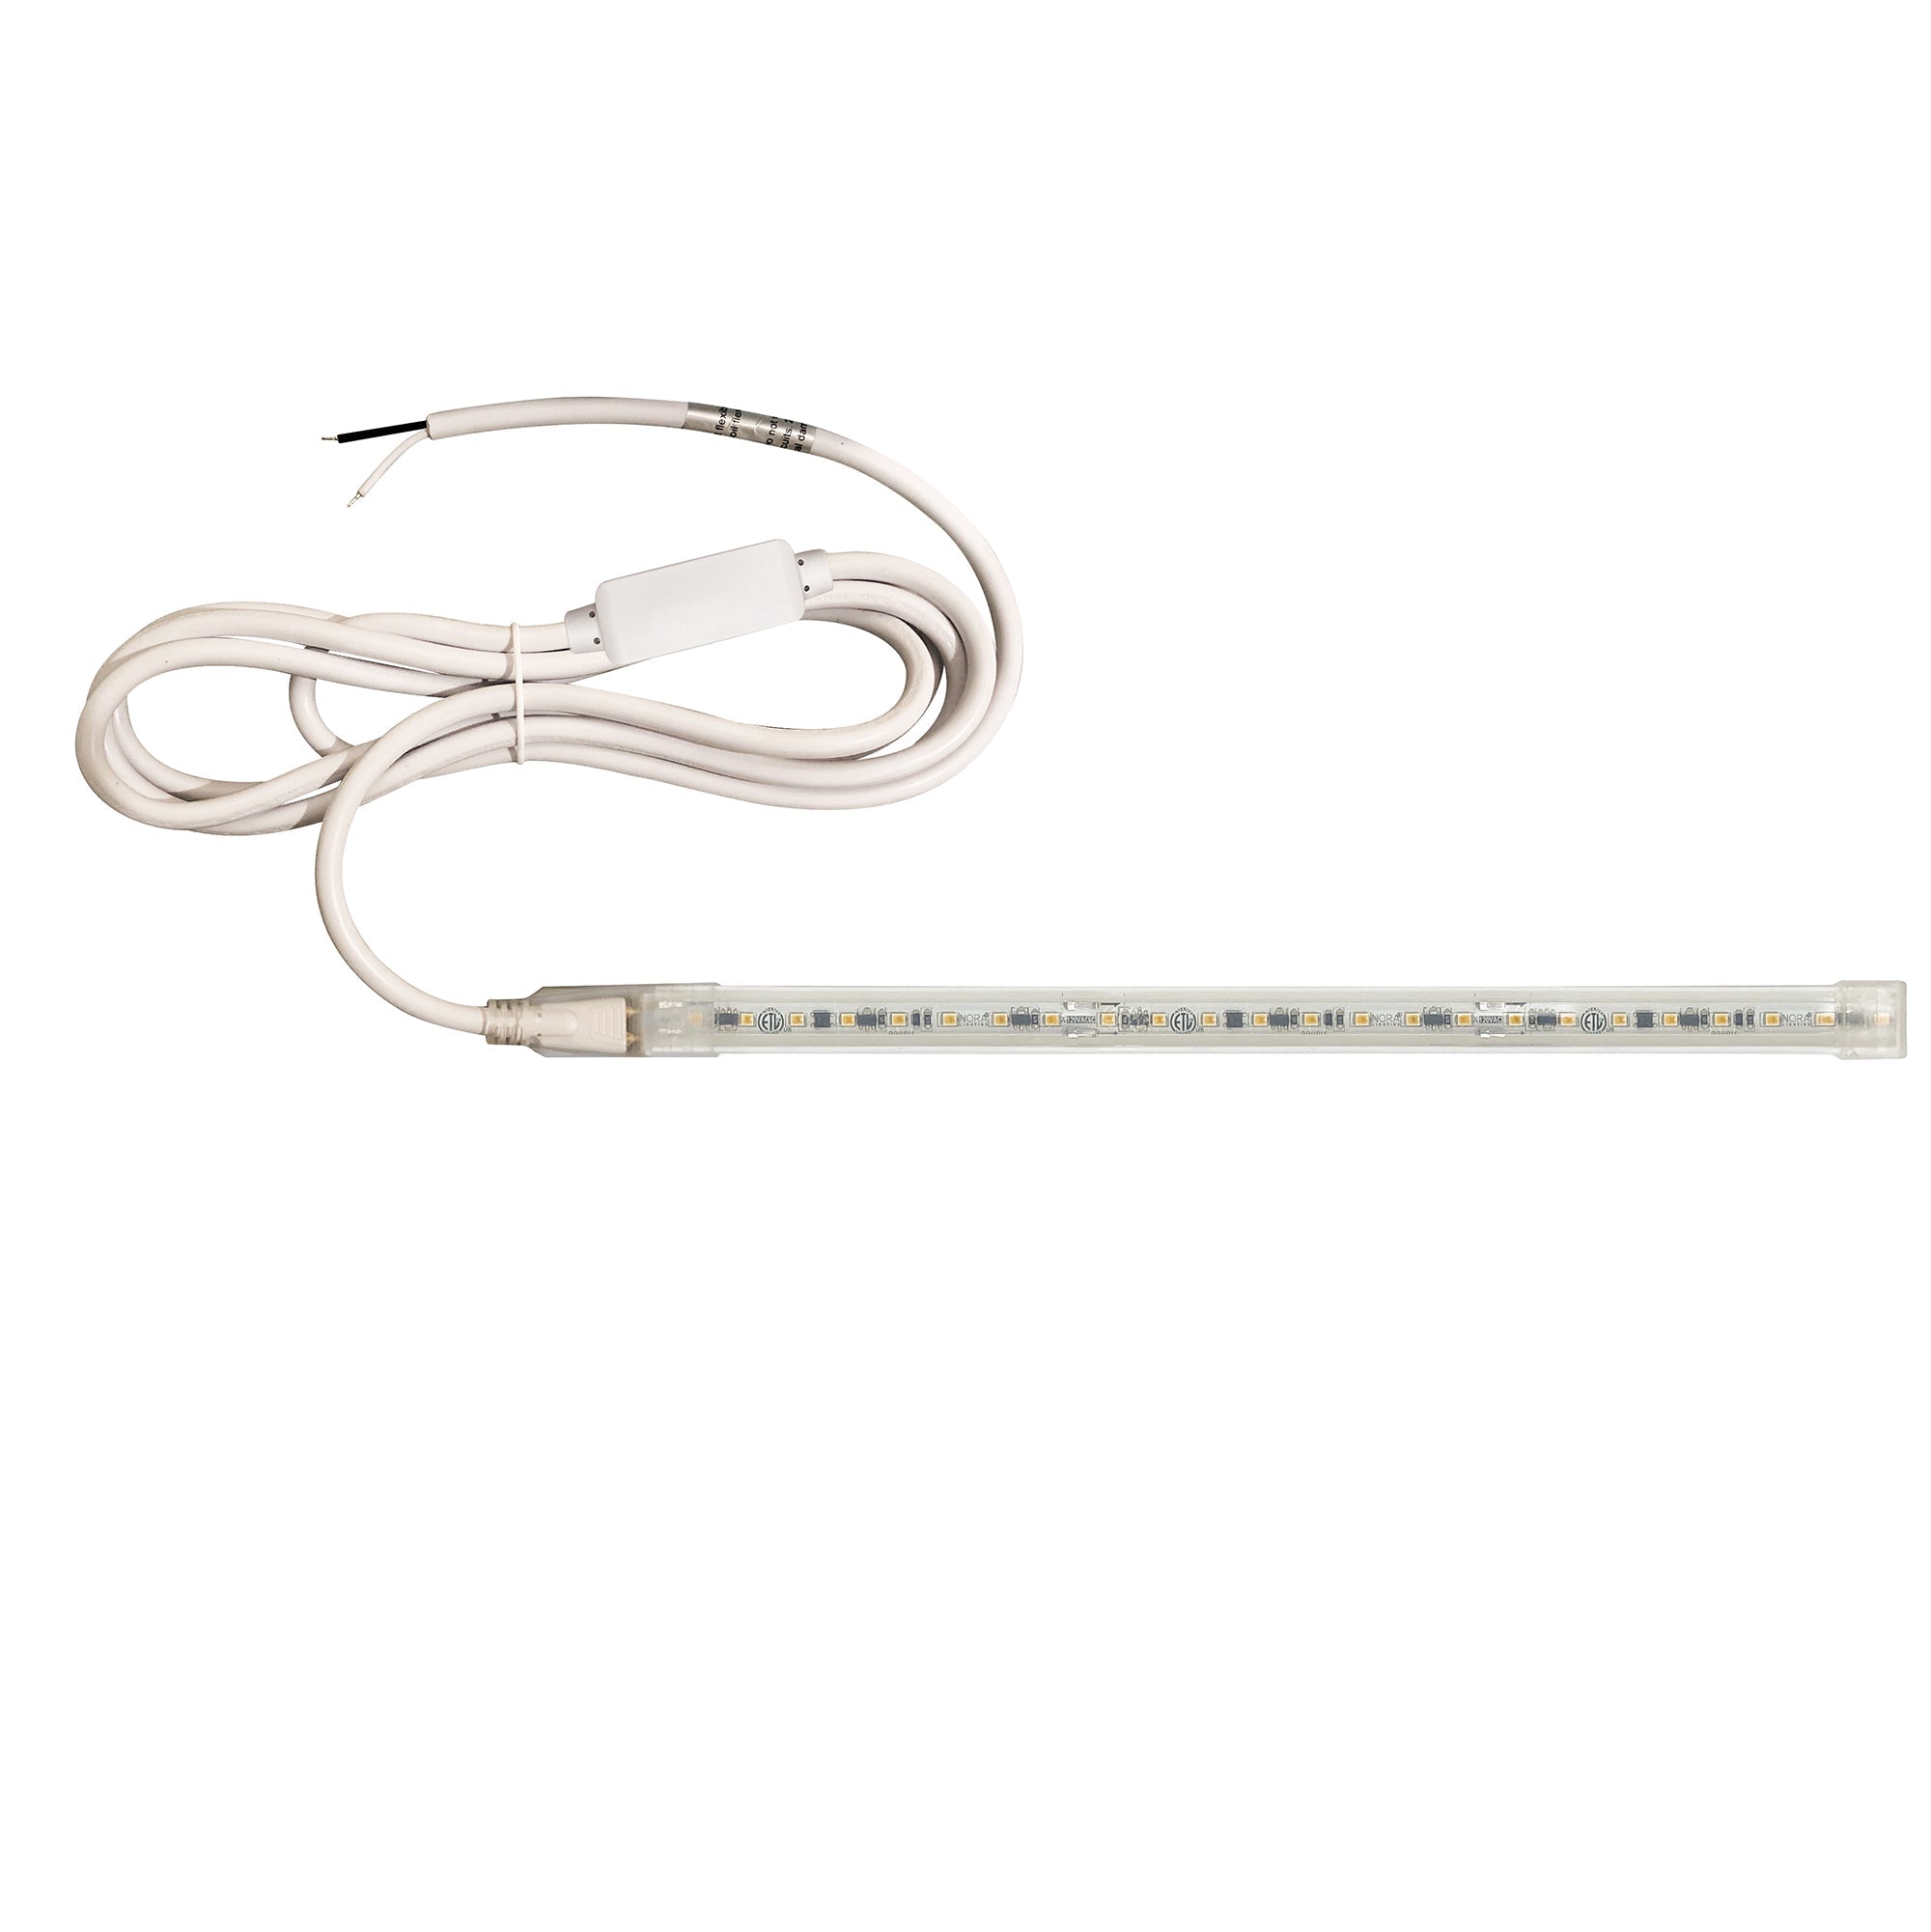 Nora Lighting NUTP13-W51-12-930/HWSP - Accent / Undercabinet - Custom Cut 51-ft 120V Continuous LED Tape Light, 330lm / 3.6W per foot, 3000K, w/ Mounting Clips and 8' Hardwired Power Cord w/ Surge Protector